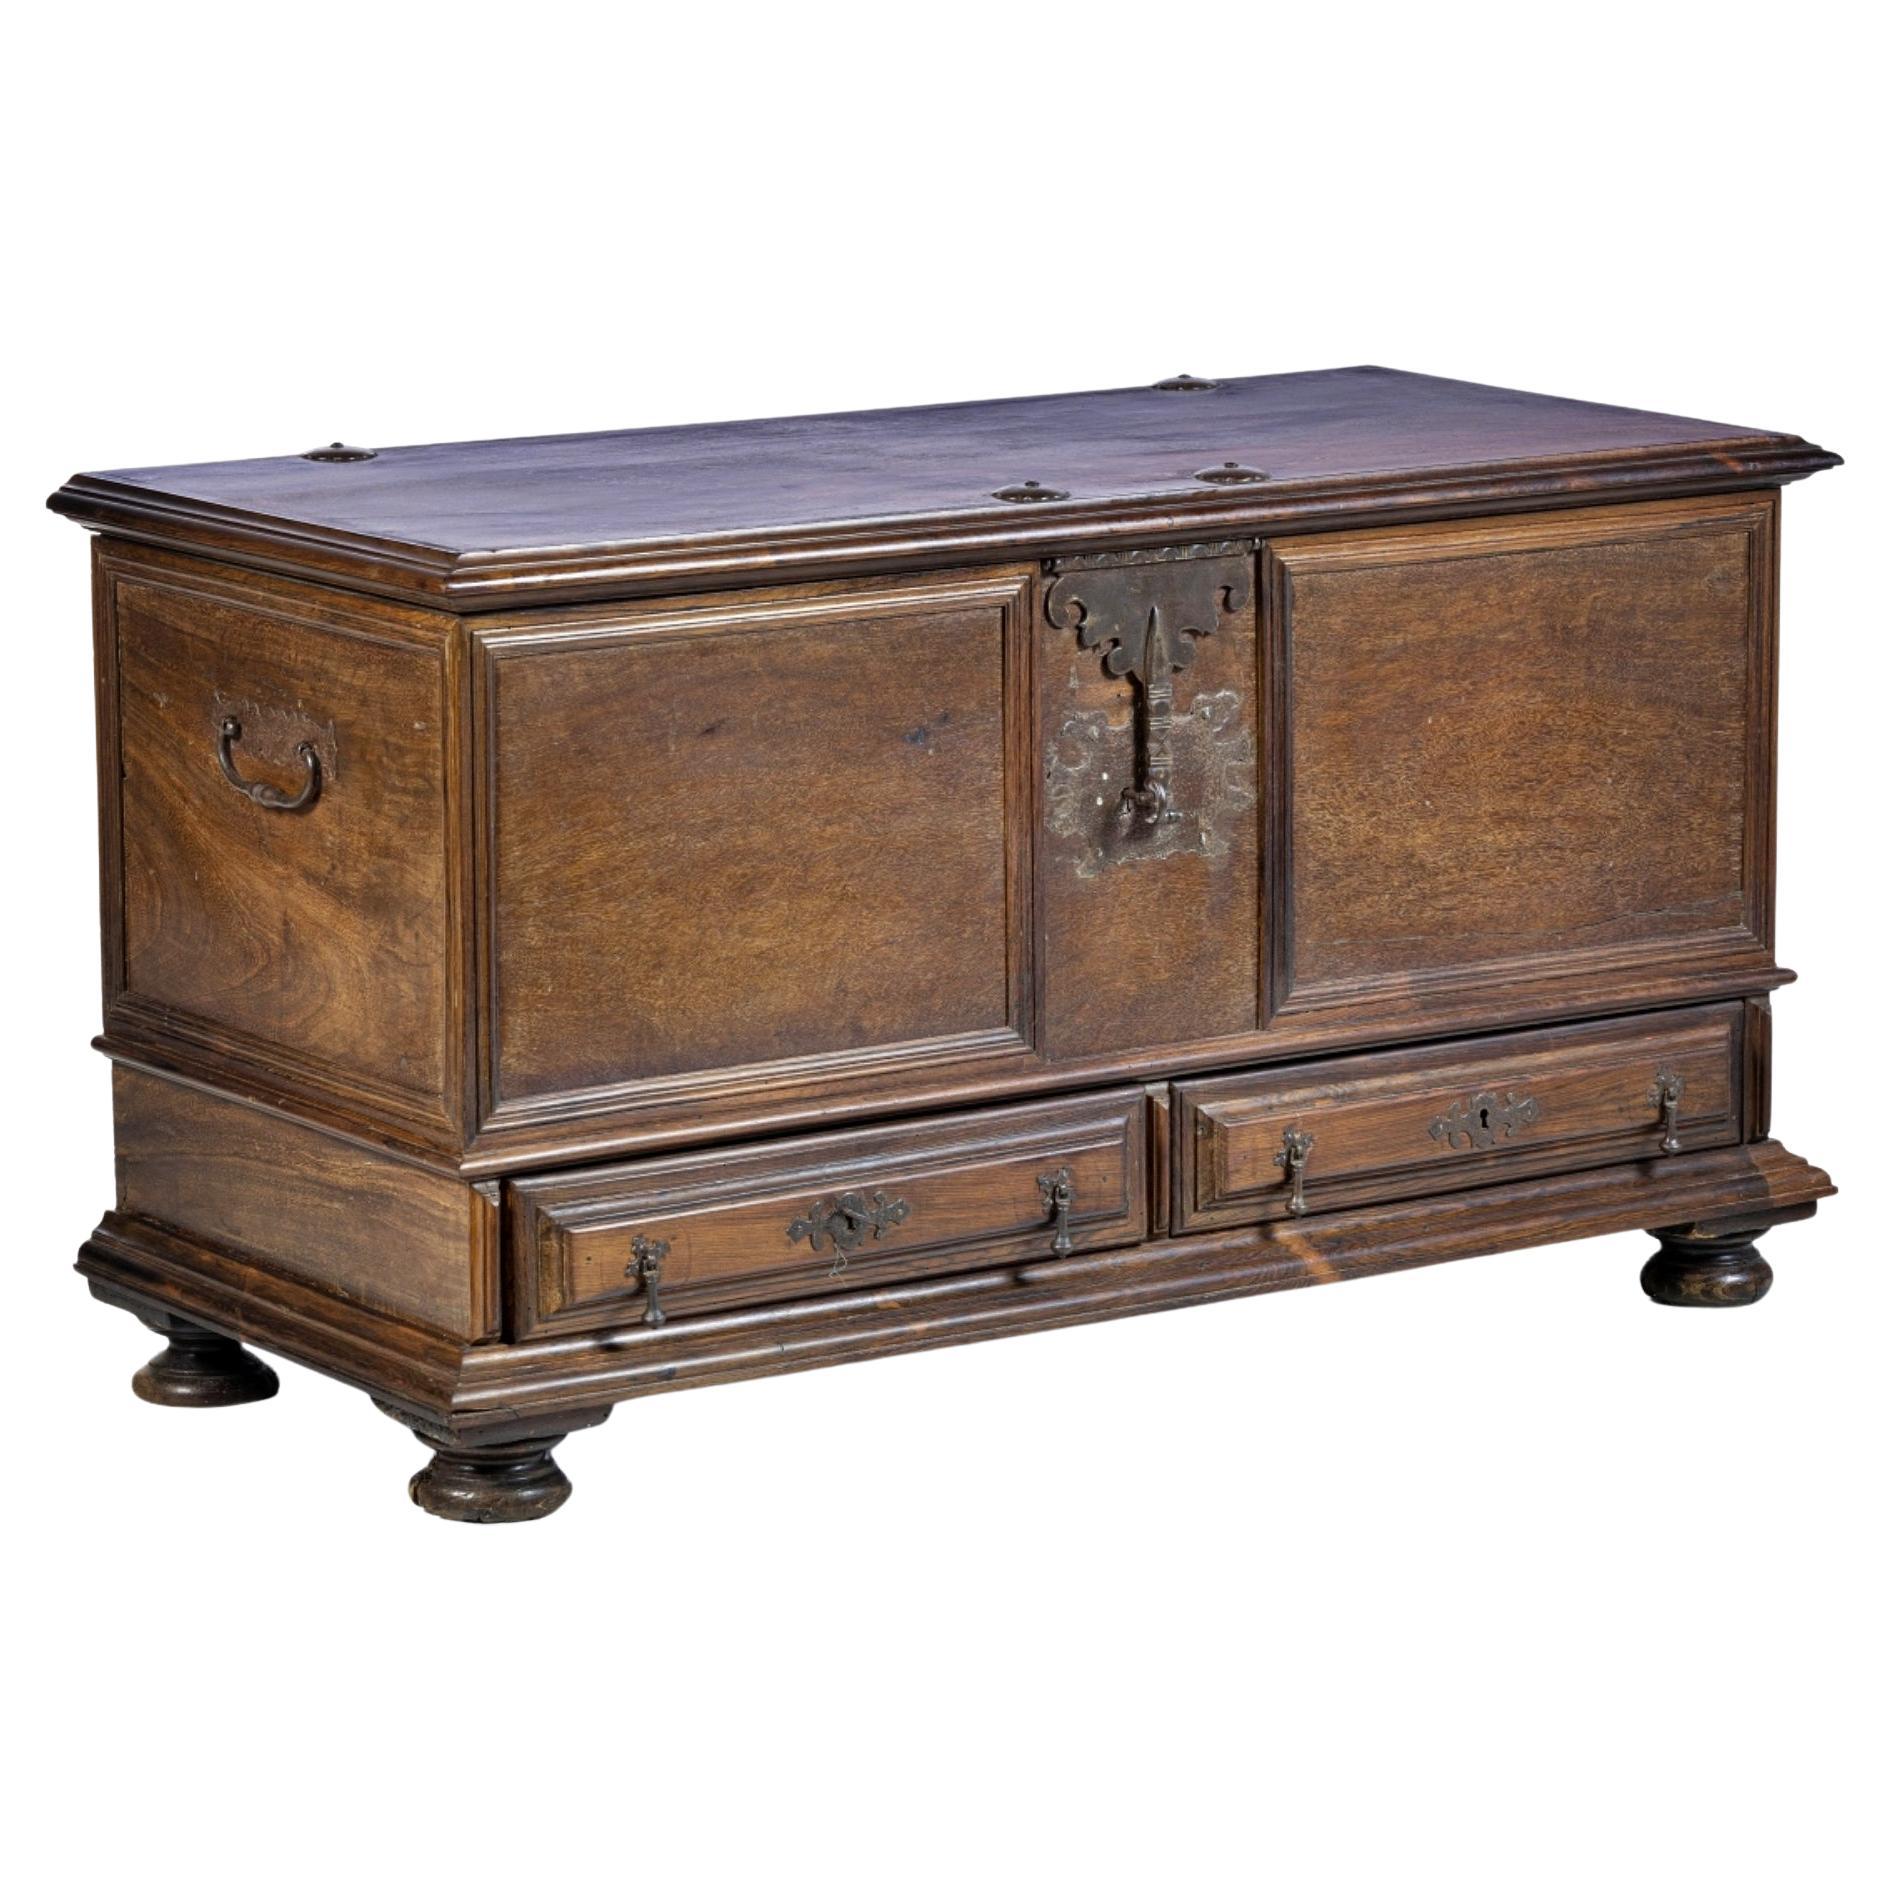 Portuguese Rosewood Chest with Two Drawers, 17th Century